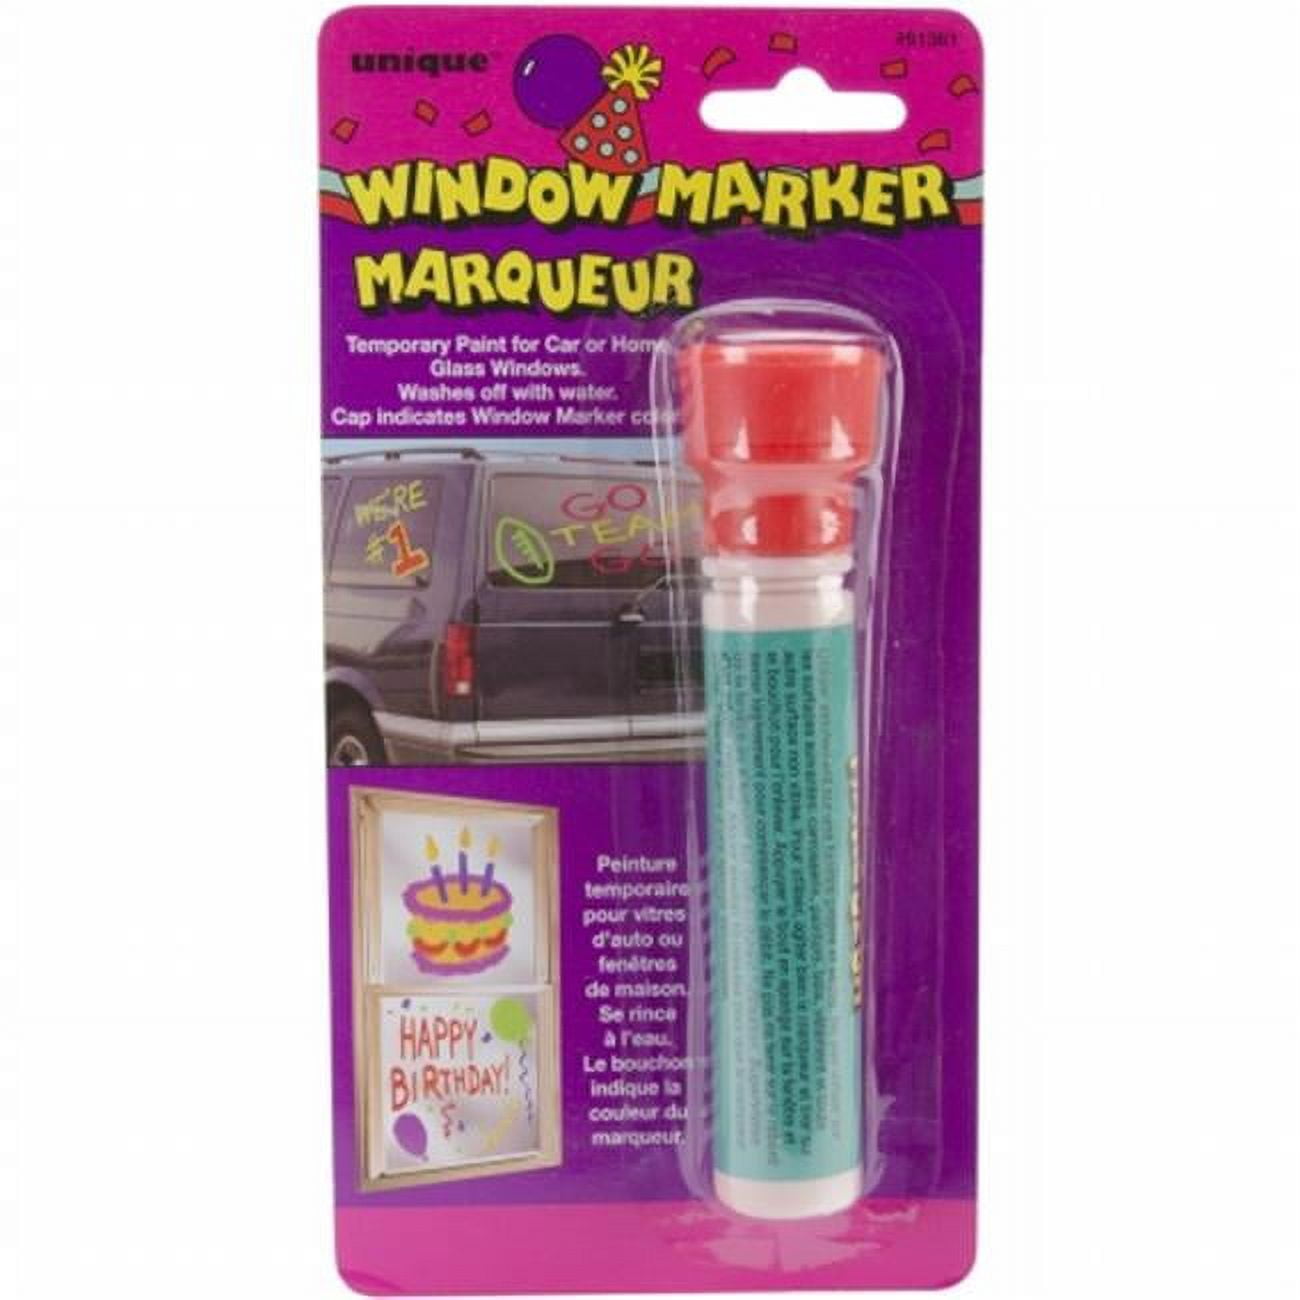  Window Marker - Black (Temporary Paint for Car or Home Windows  - Washes Off with Water) : Arts, Crafts & Sewing